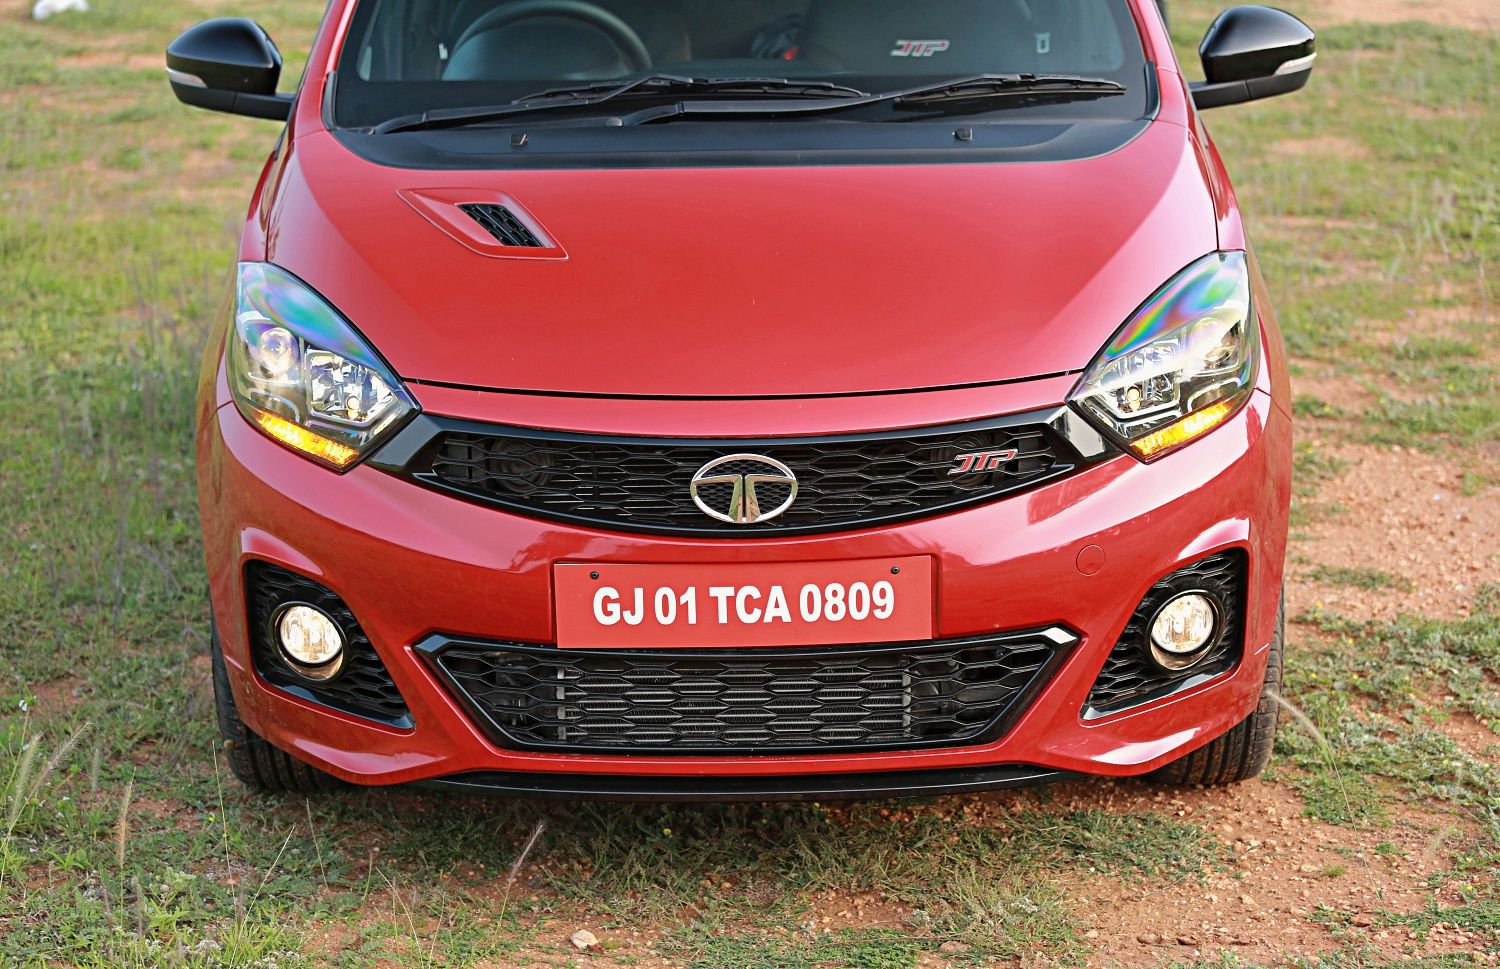 Tiago & Tigor JTP Officially Discontinued; Tata Assures Support To Existing Owners